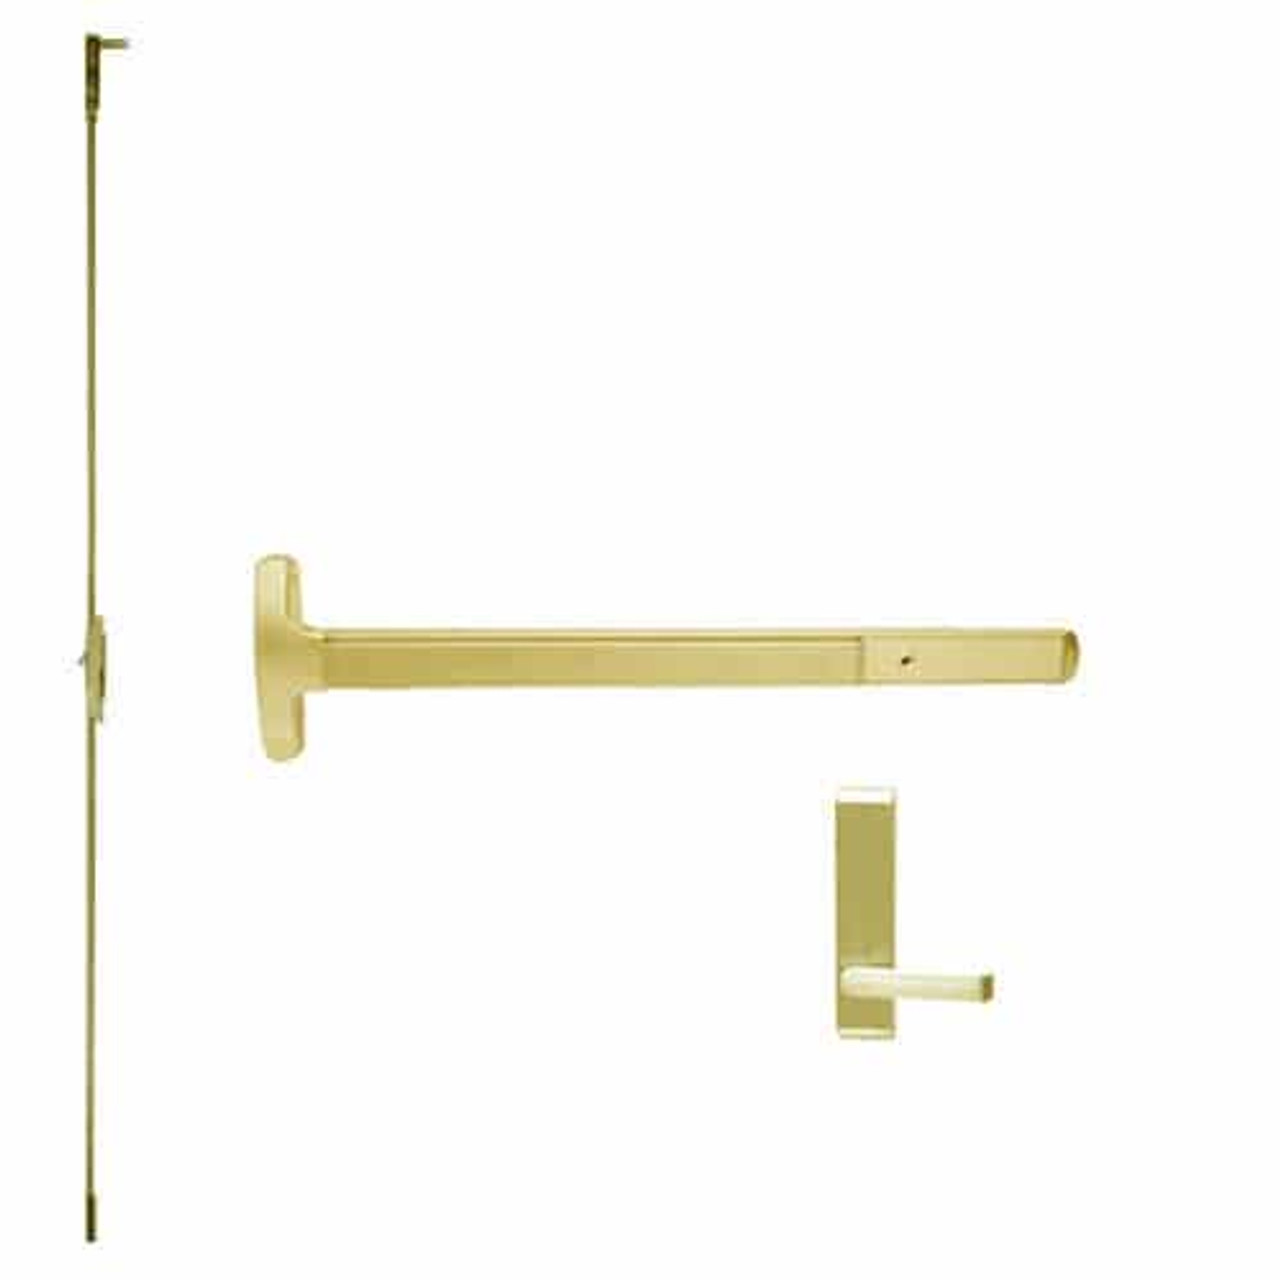 24-C-L-DT-DANE-US3-4-LHR Falcon Exit Device in Polished Brass